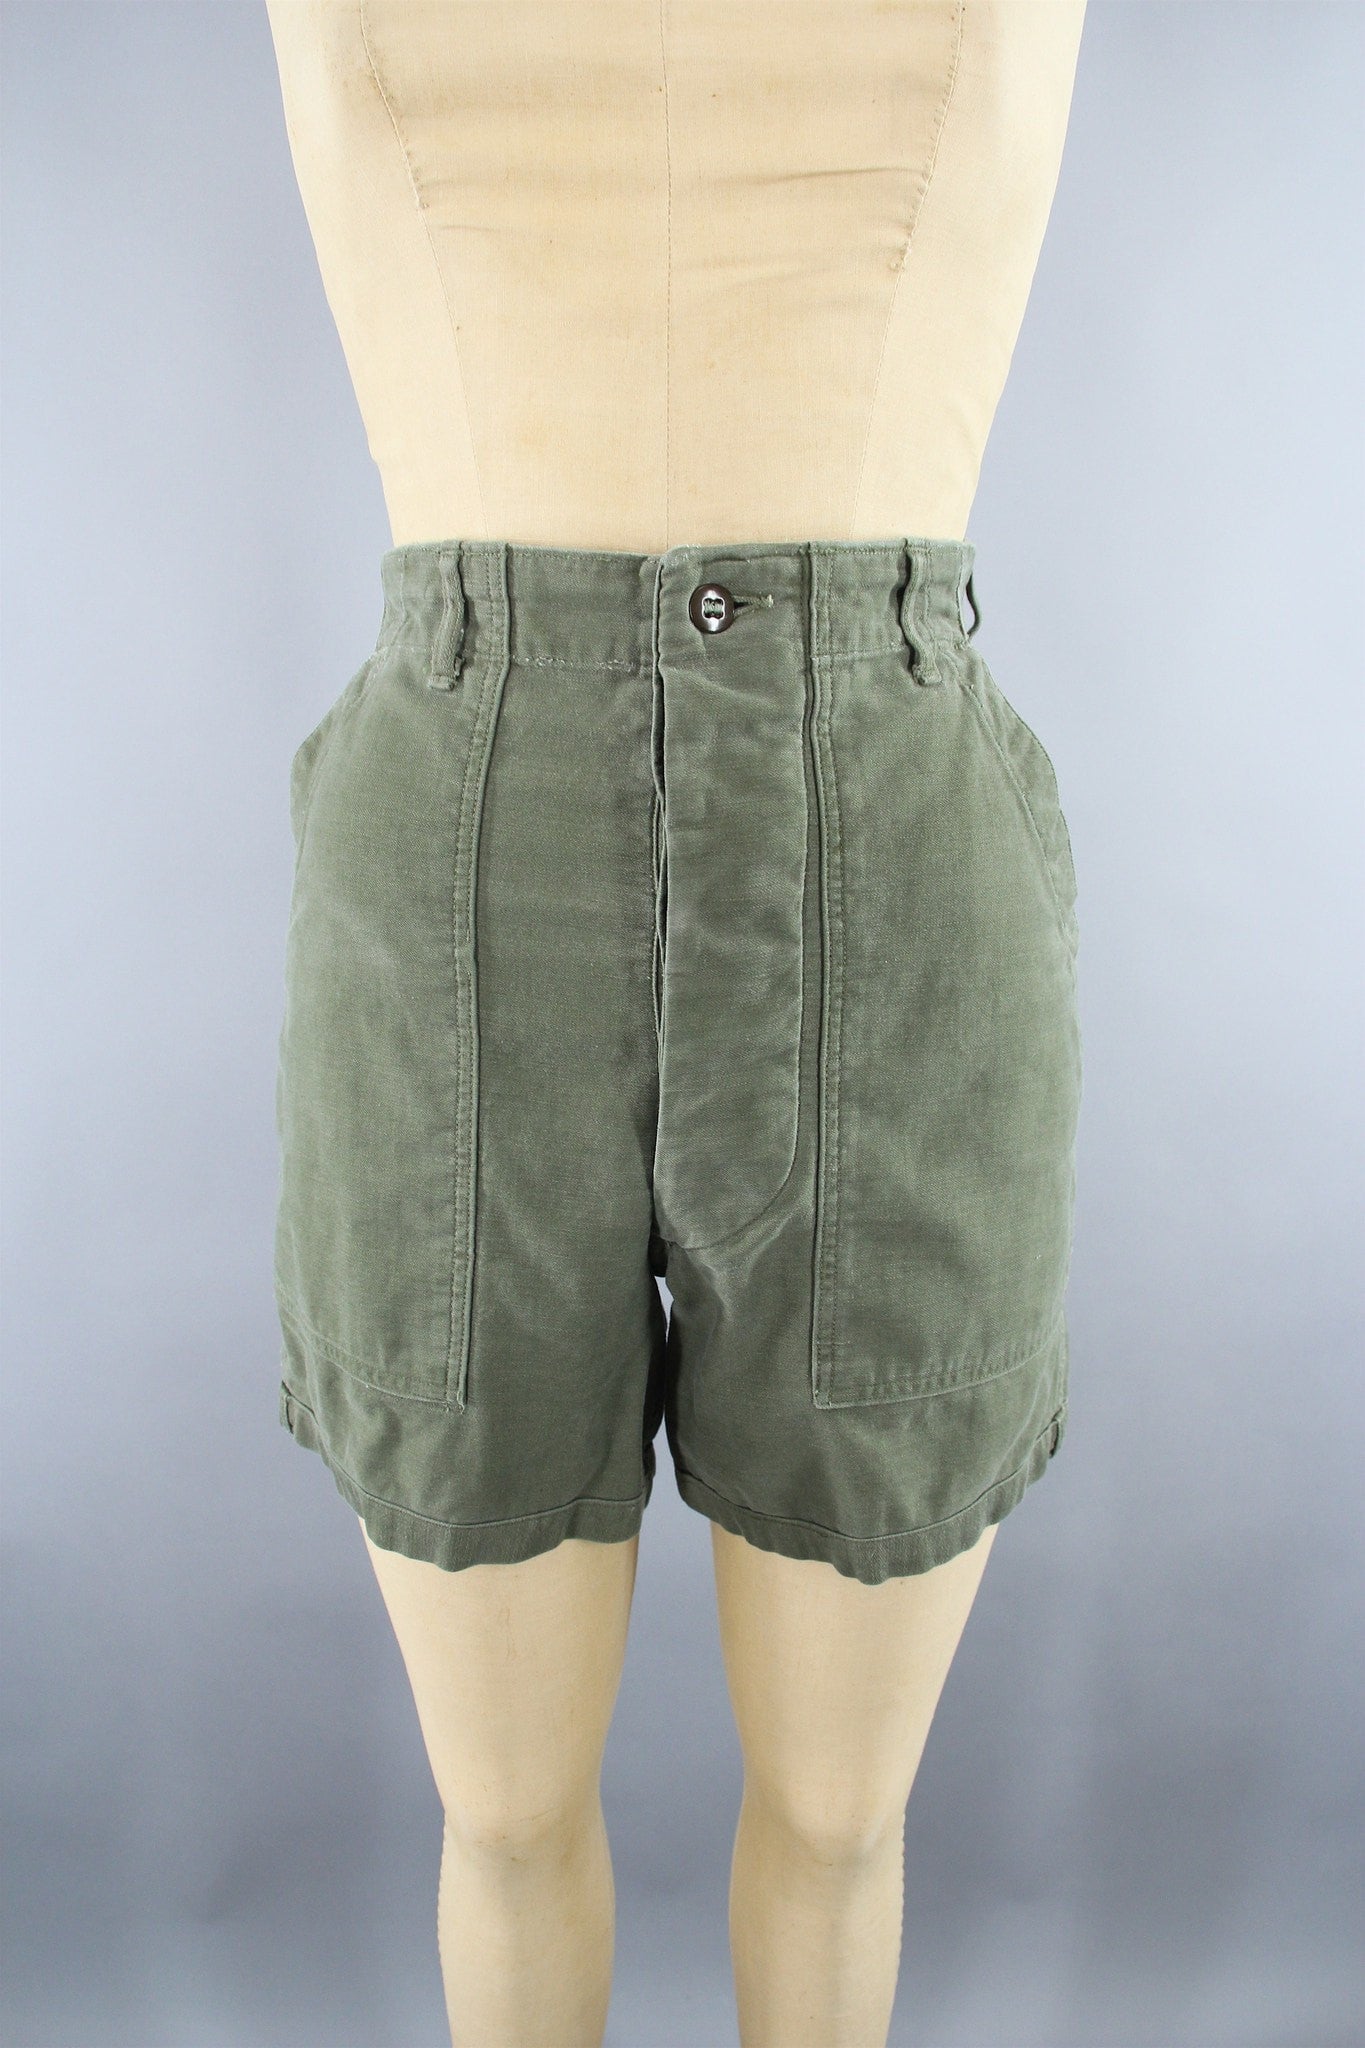 Vintage 1940s US Army Green Military Shorts - ThisBlueBird